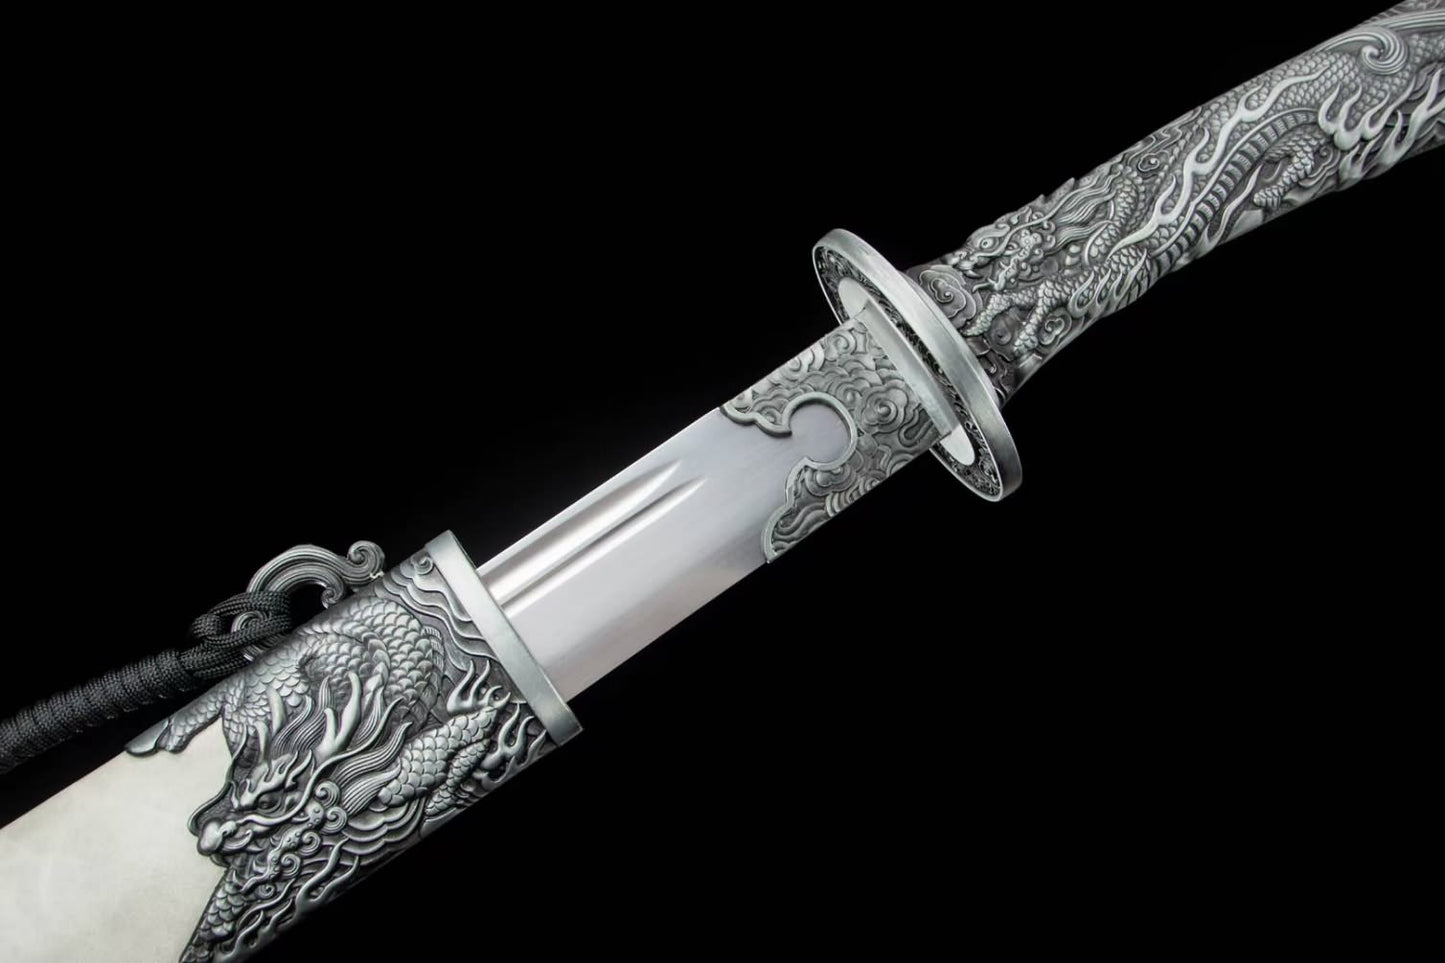 Qing dao Dynasty Army Battle Ready,Forged Blade with Alloy Fittings and Faux Leather Scabbard